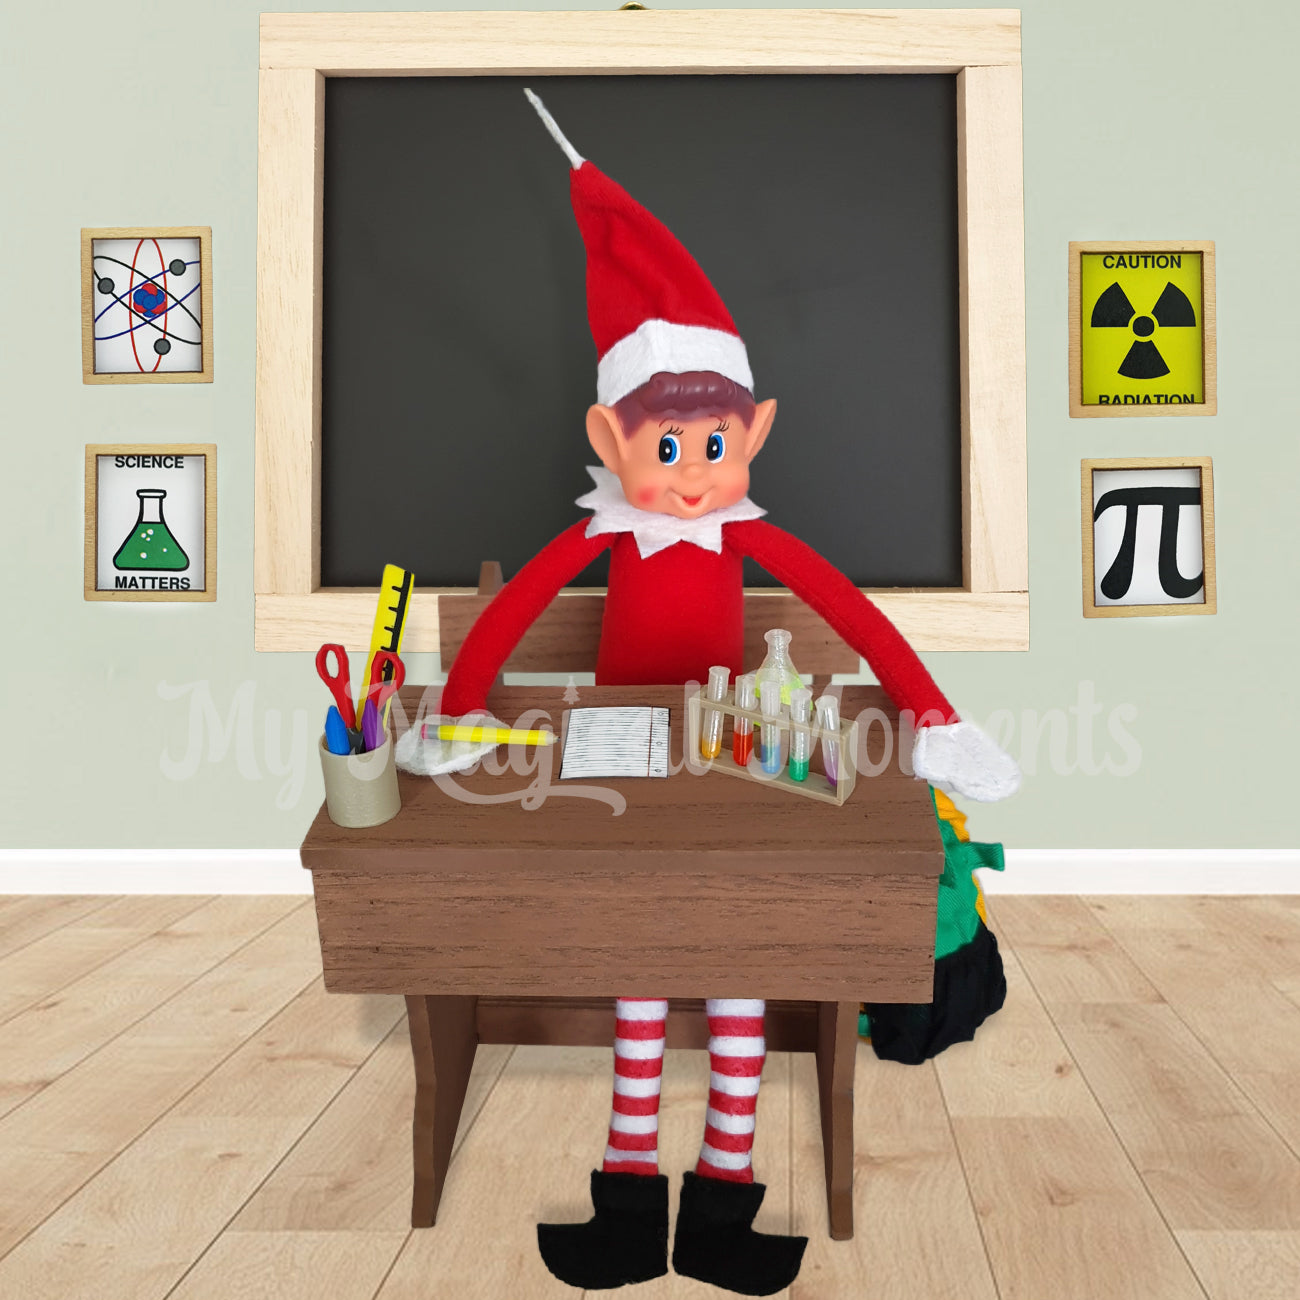 Elves behavin badly sitting at a miniature school desk learning chemistry. They have a backpack and chalkboard in the scene